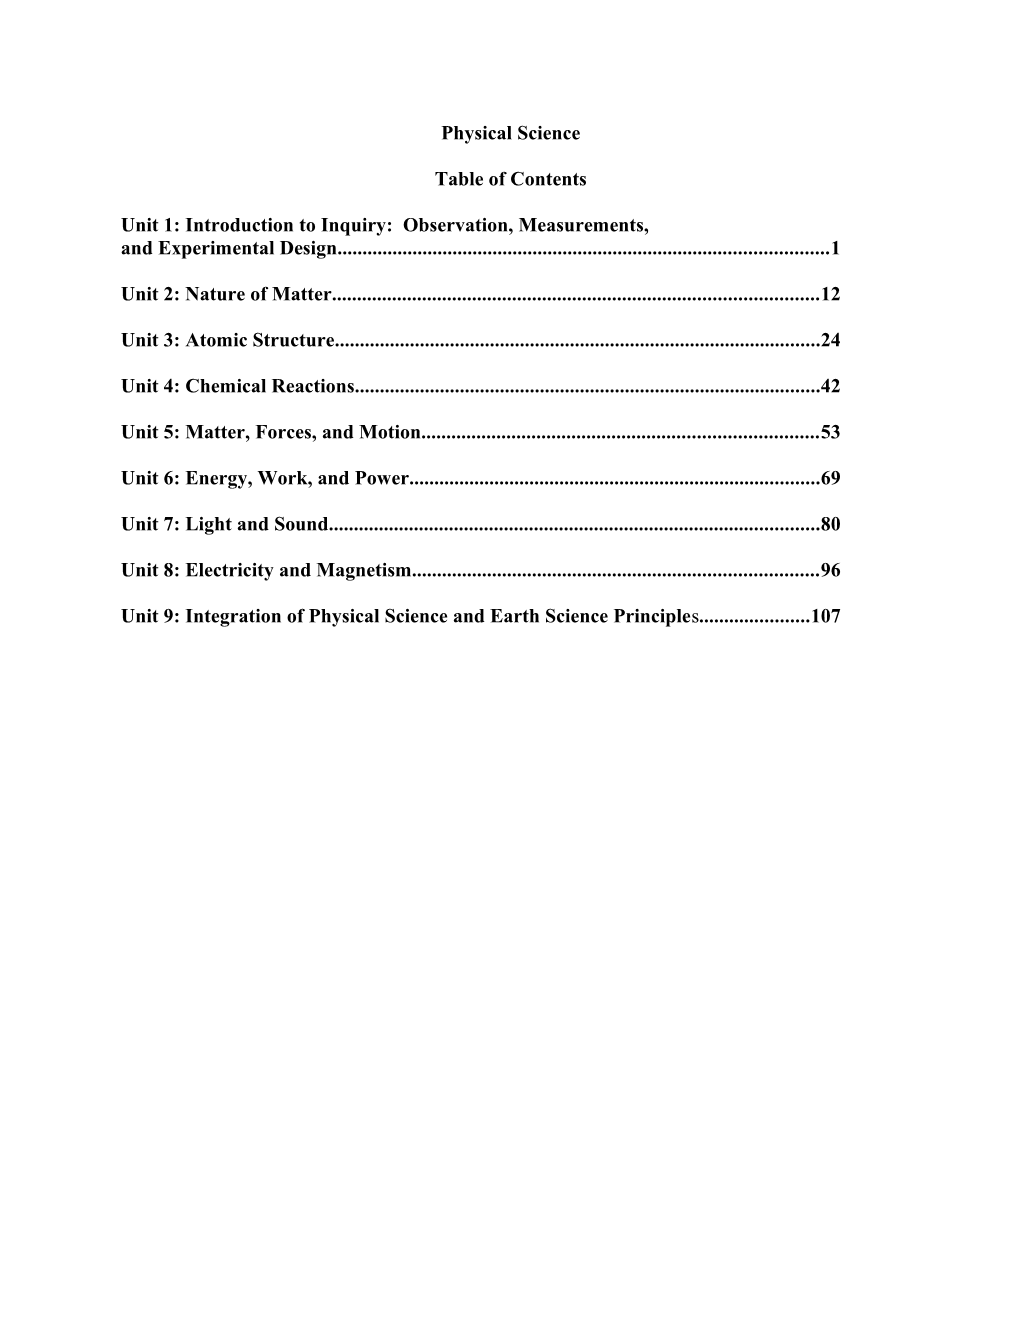 Table of Contents s279